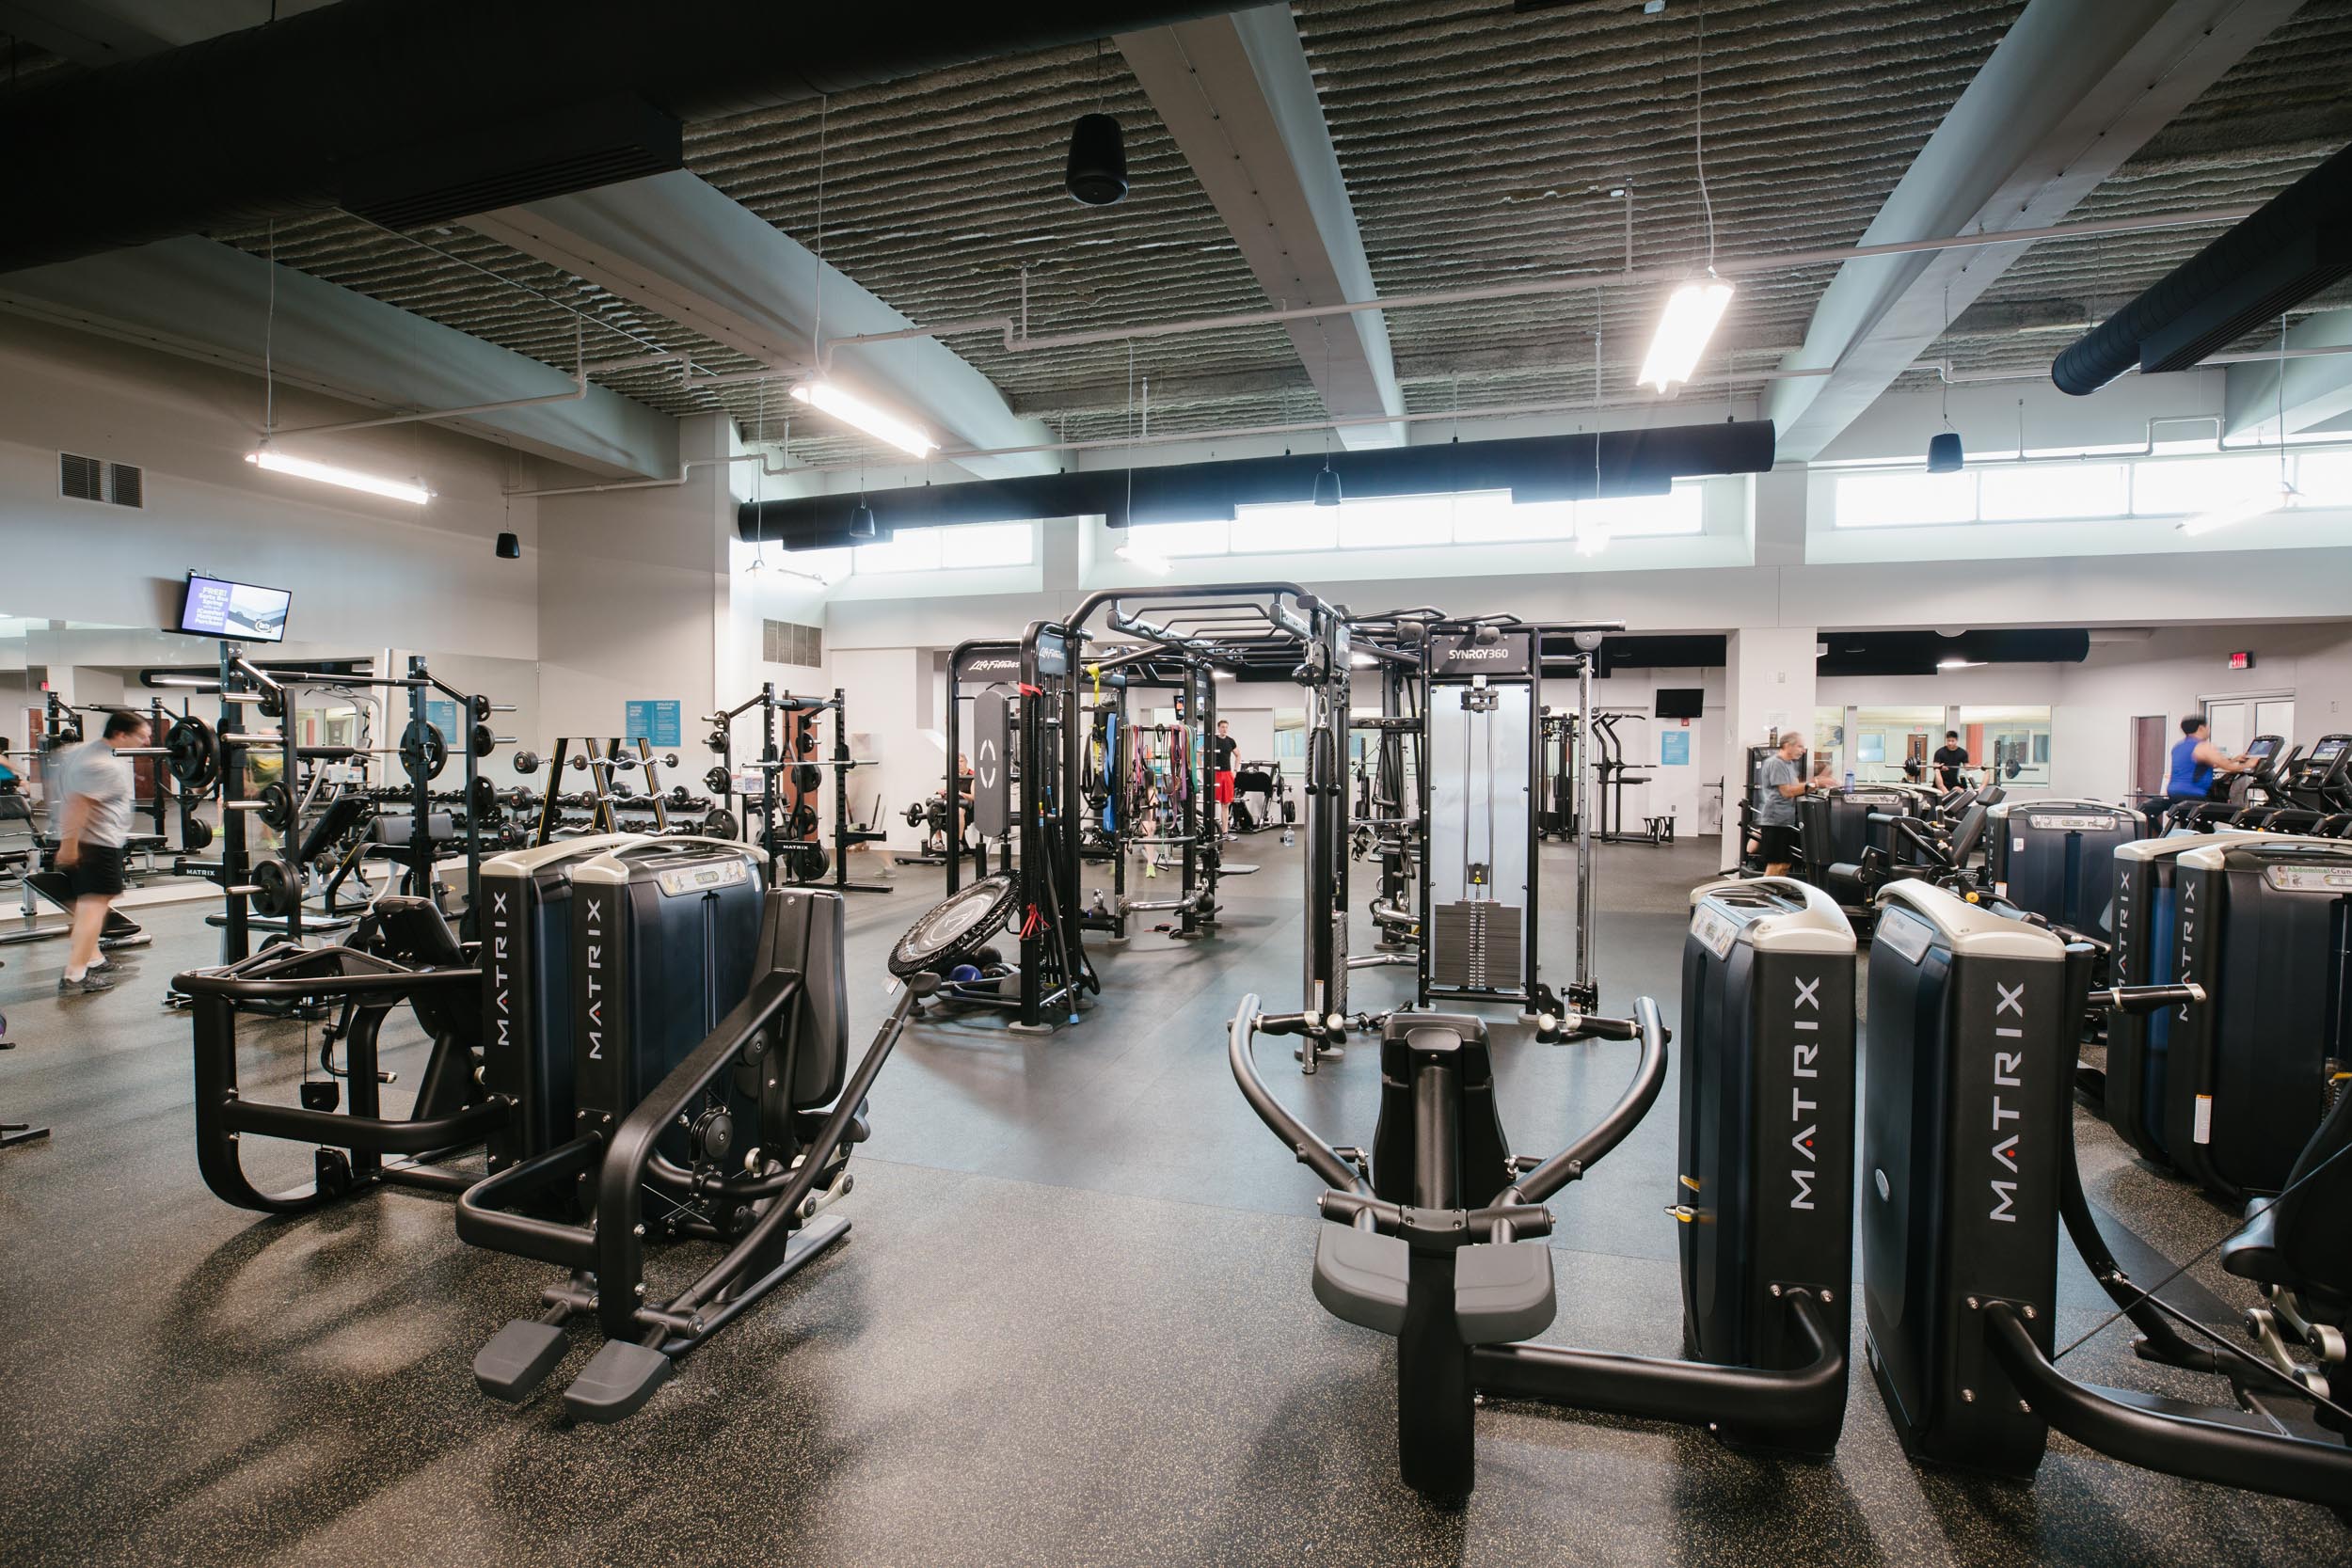 Fitness Center At The Jones Gym